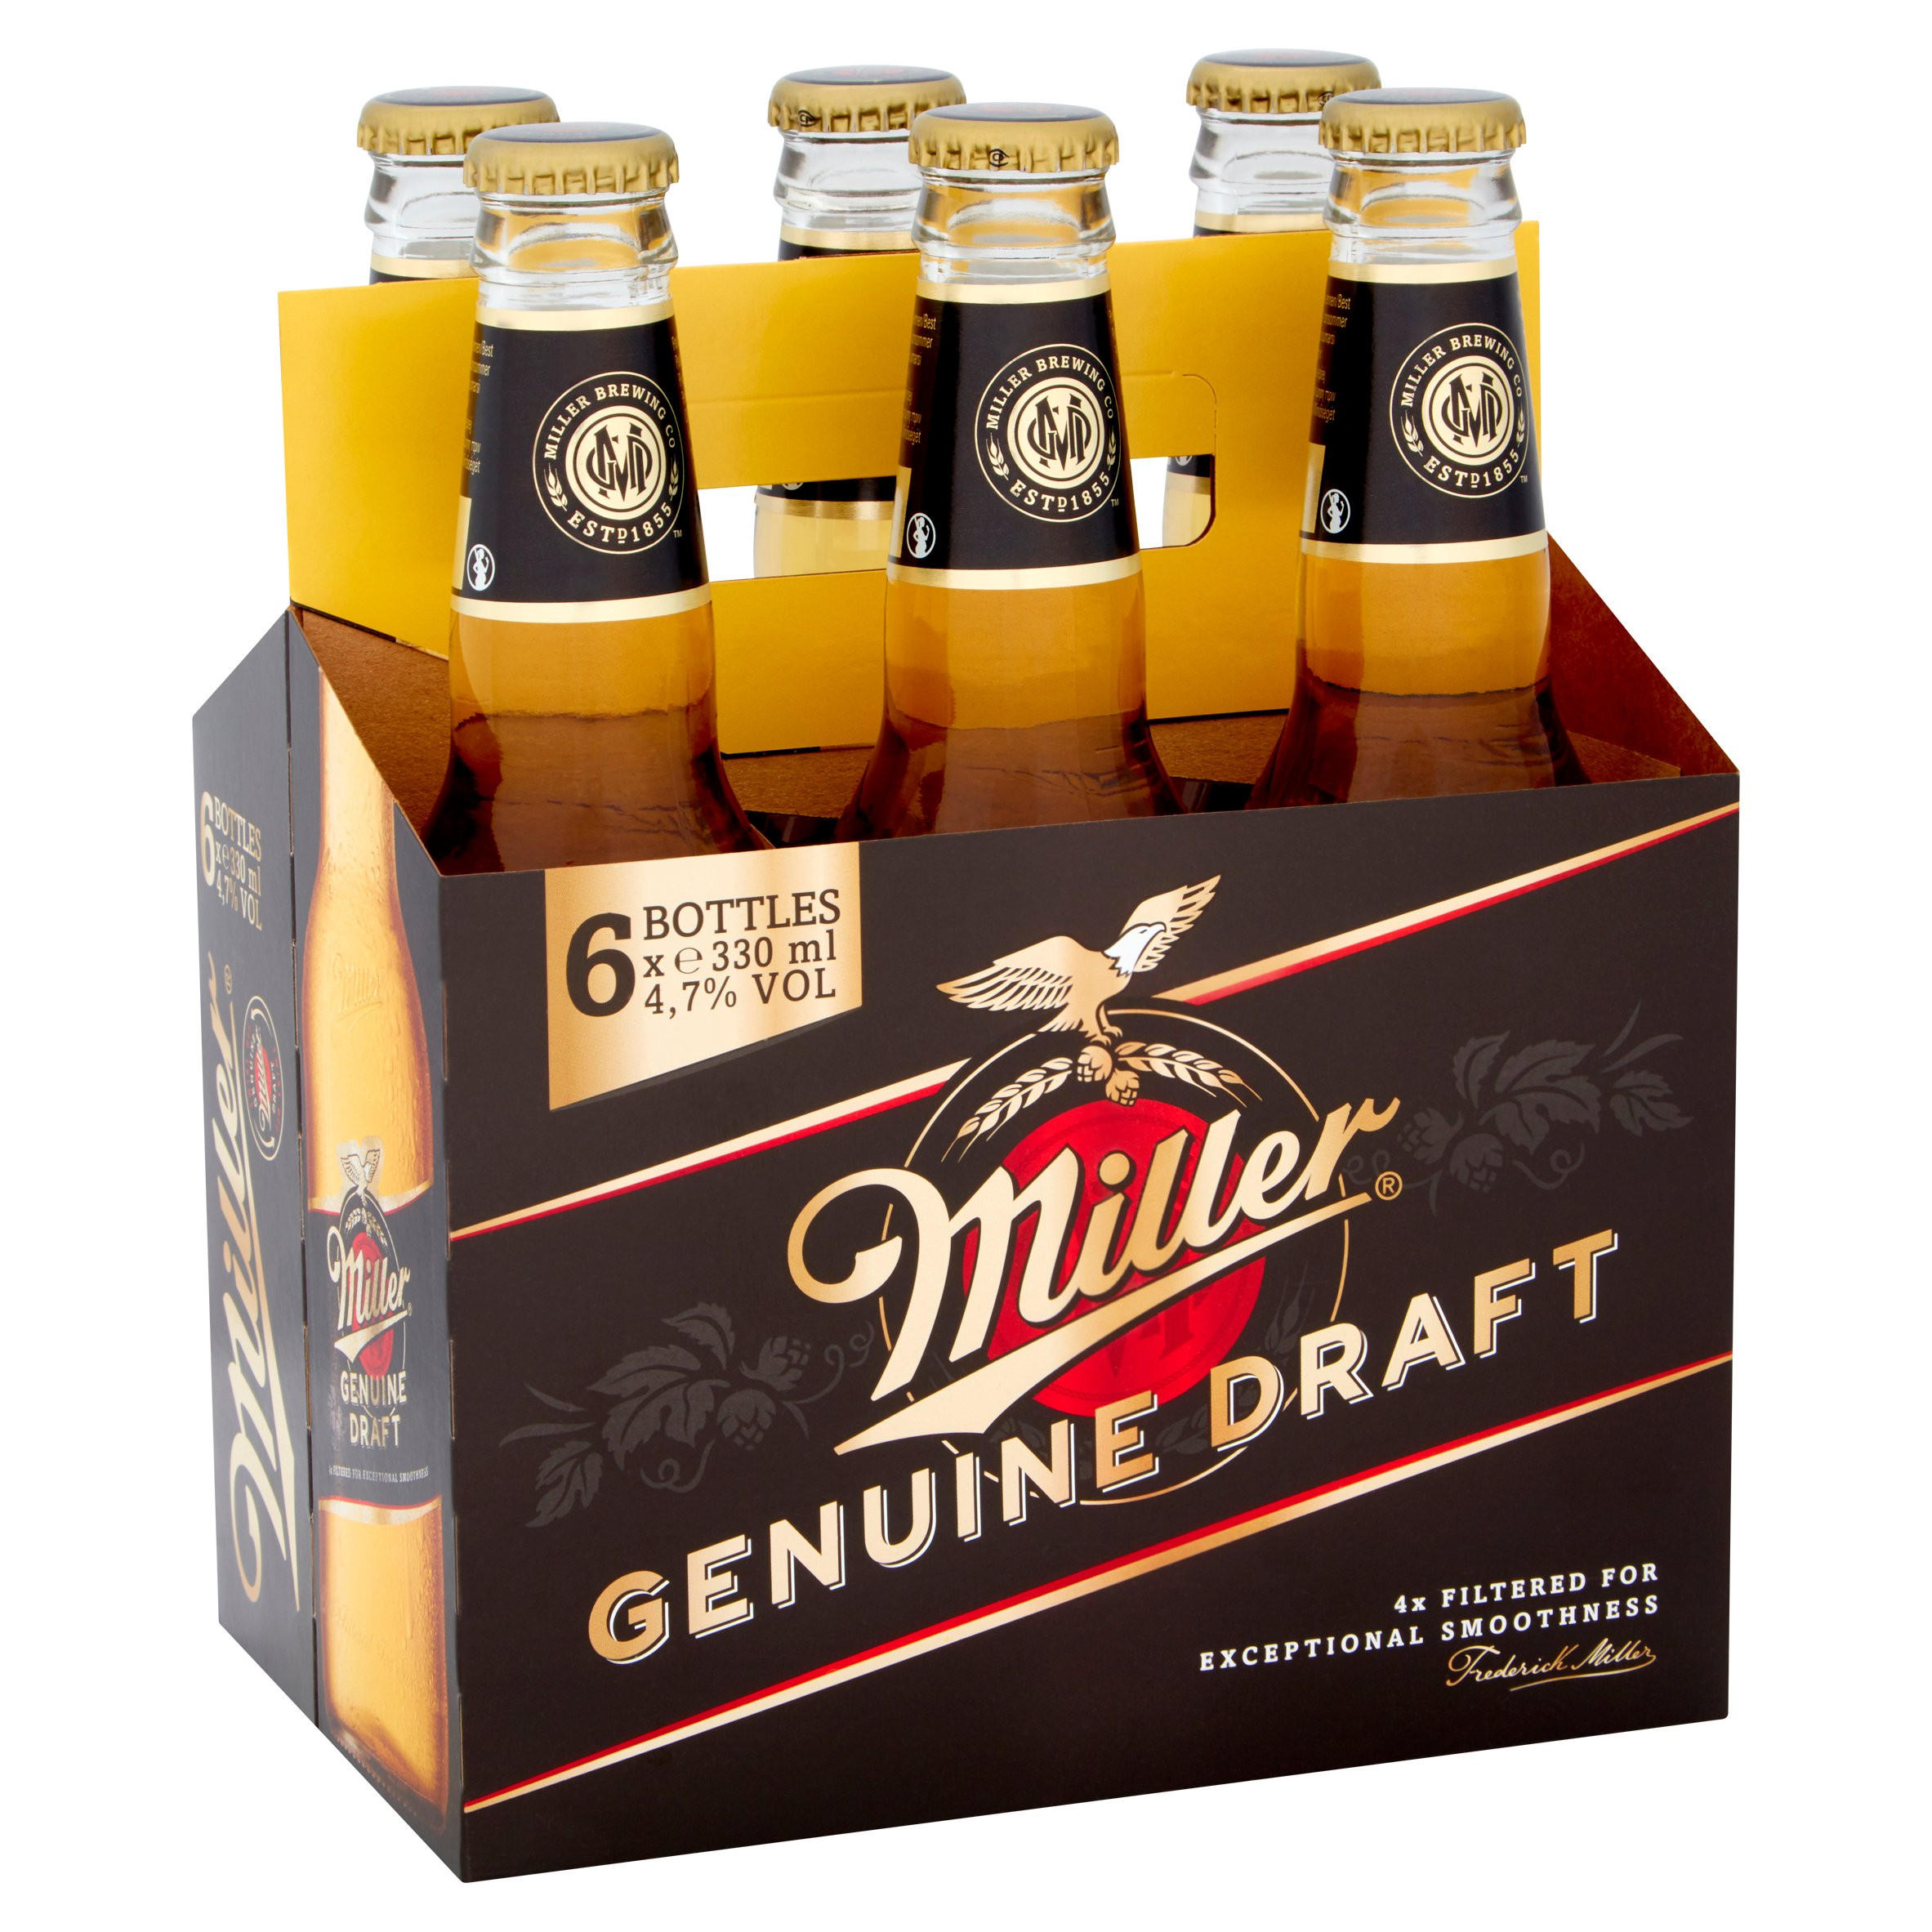 Миллер пиво. Старый Миллер пиво. Пиво MGD. Пиво Миллер Genuine Draft 4х Filtered for exceptional smooth. Миллер стар